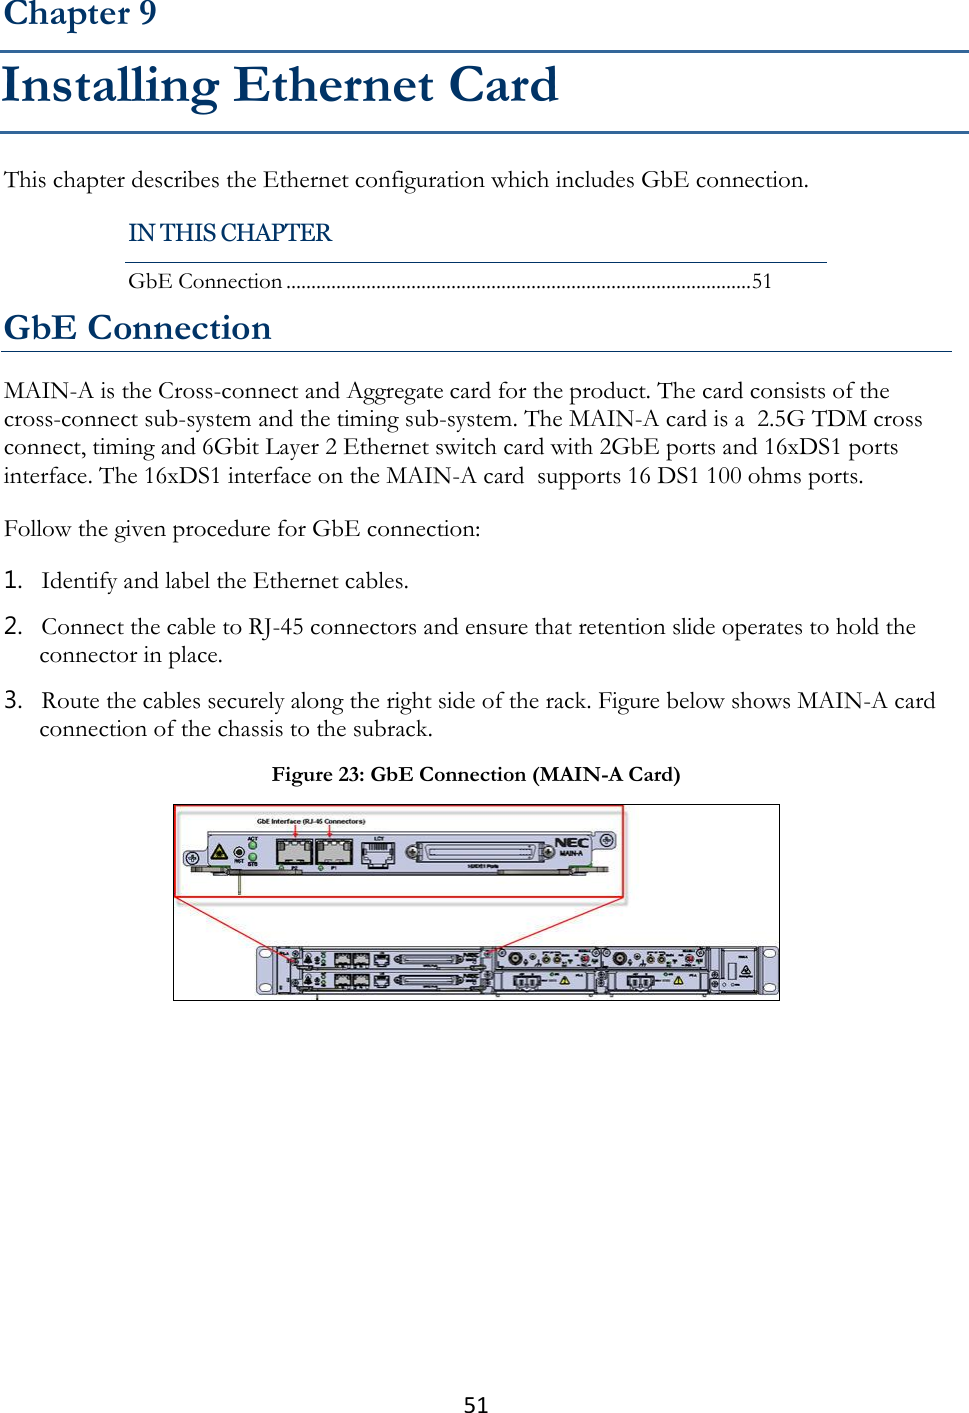 51  This chapter describes the Ethernet configuration which includes GbE connection. GbE Connection MAIN-A is the Cross-connect and Aggregate card for the product. The card consists of the cross-connect sub-system and the timing sub-system. The MAIN-A card is a  2.5G TDM cross connect, timing and 6Gbit Layer 2 Ethernet switch card with 2GbE ports and 16xDS1 ports interface. The 16xDS1 interface on the MAIN-A card  supports 16 DS1 100 ohms ports. Follow the given procedure for GbE connection: 1. Identify and label the Ethernet cables. 2. Connect the cable to RJ-45 connectors and ensure that retention slide operates to hold the connector in place. 3. Route the cables securely along the right side of the rack. Figure below shows MAIN-A card connection of the chassis to the subrack.  Chapter 9 Installing Ethernet Card IN THIS CHAPTER GbE Connection ............................................................................................. 51 Figure 23: GbE Connection (MAIN-A Card)  